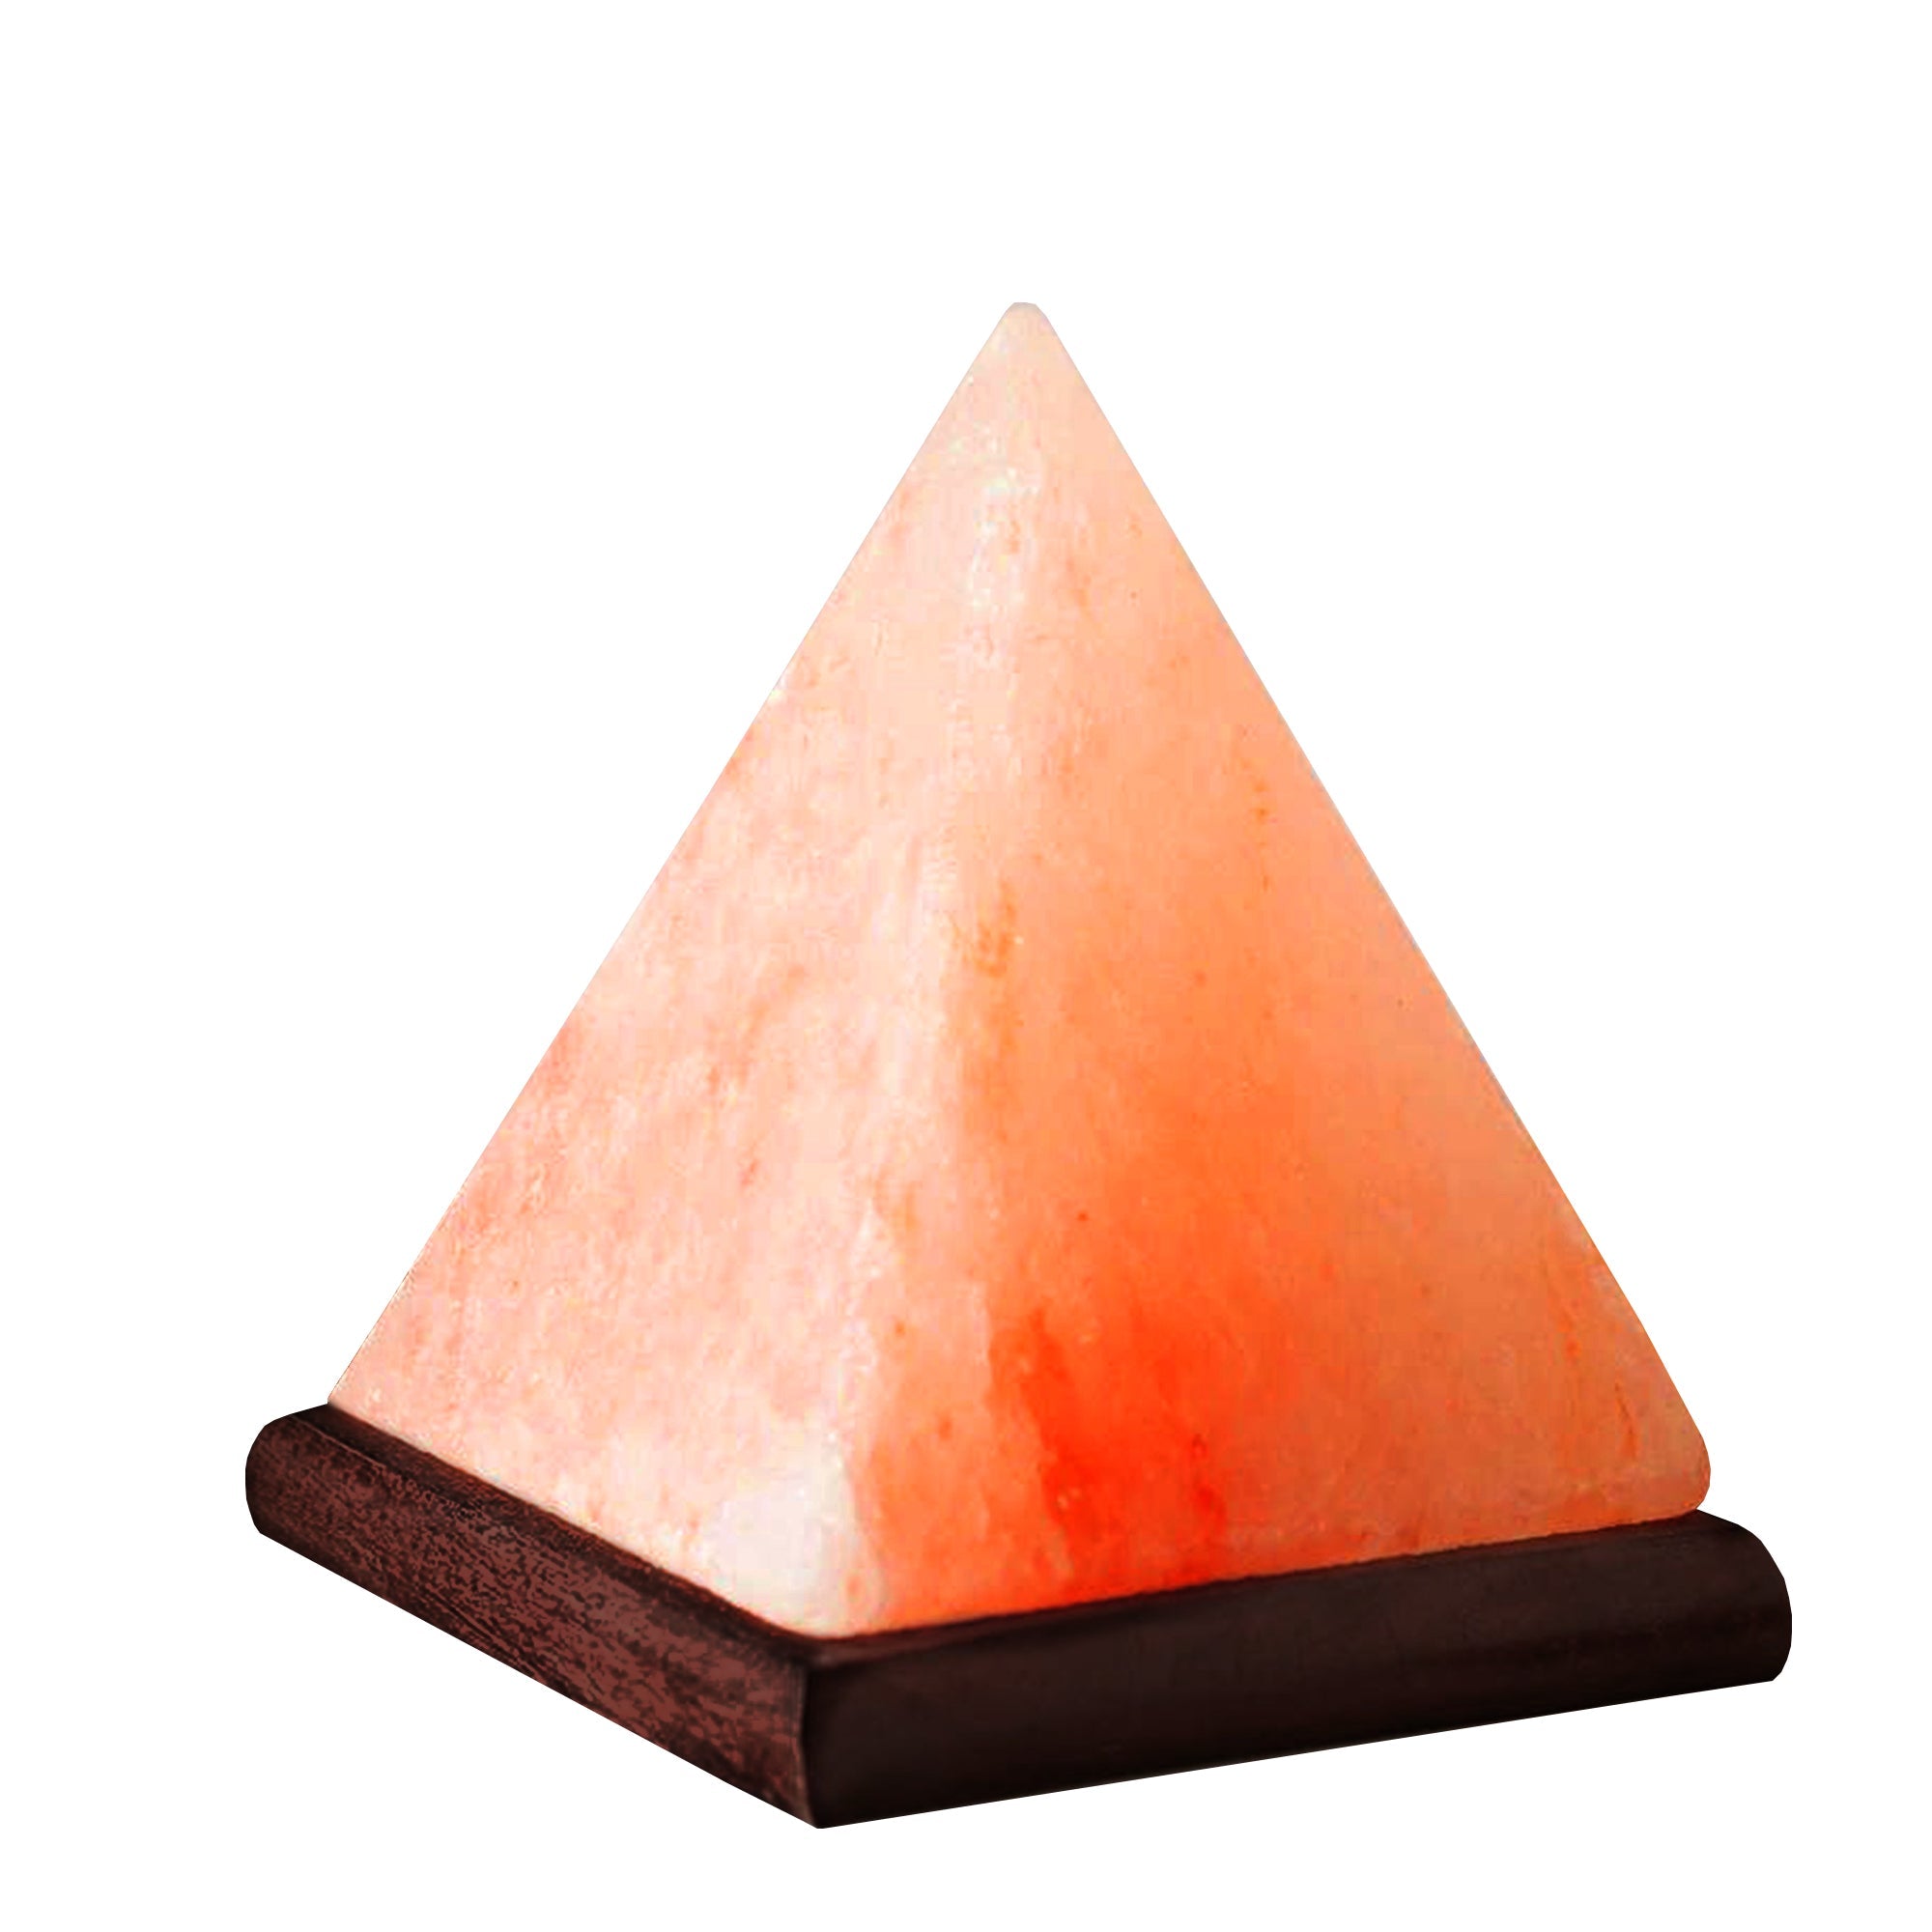 This stylish large pyramid shaped lamp isn’t something you see every day. The dark base beautifully shows off the salt colour, as the natural benefits start to work.  